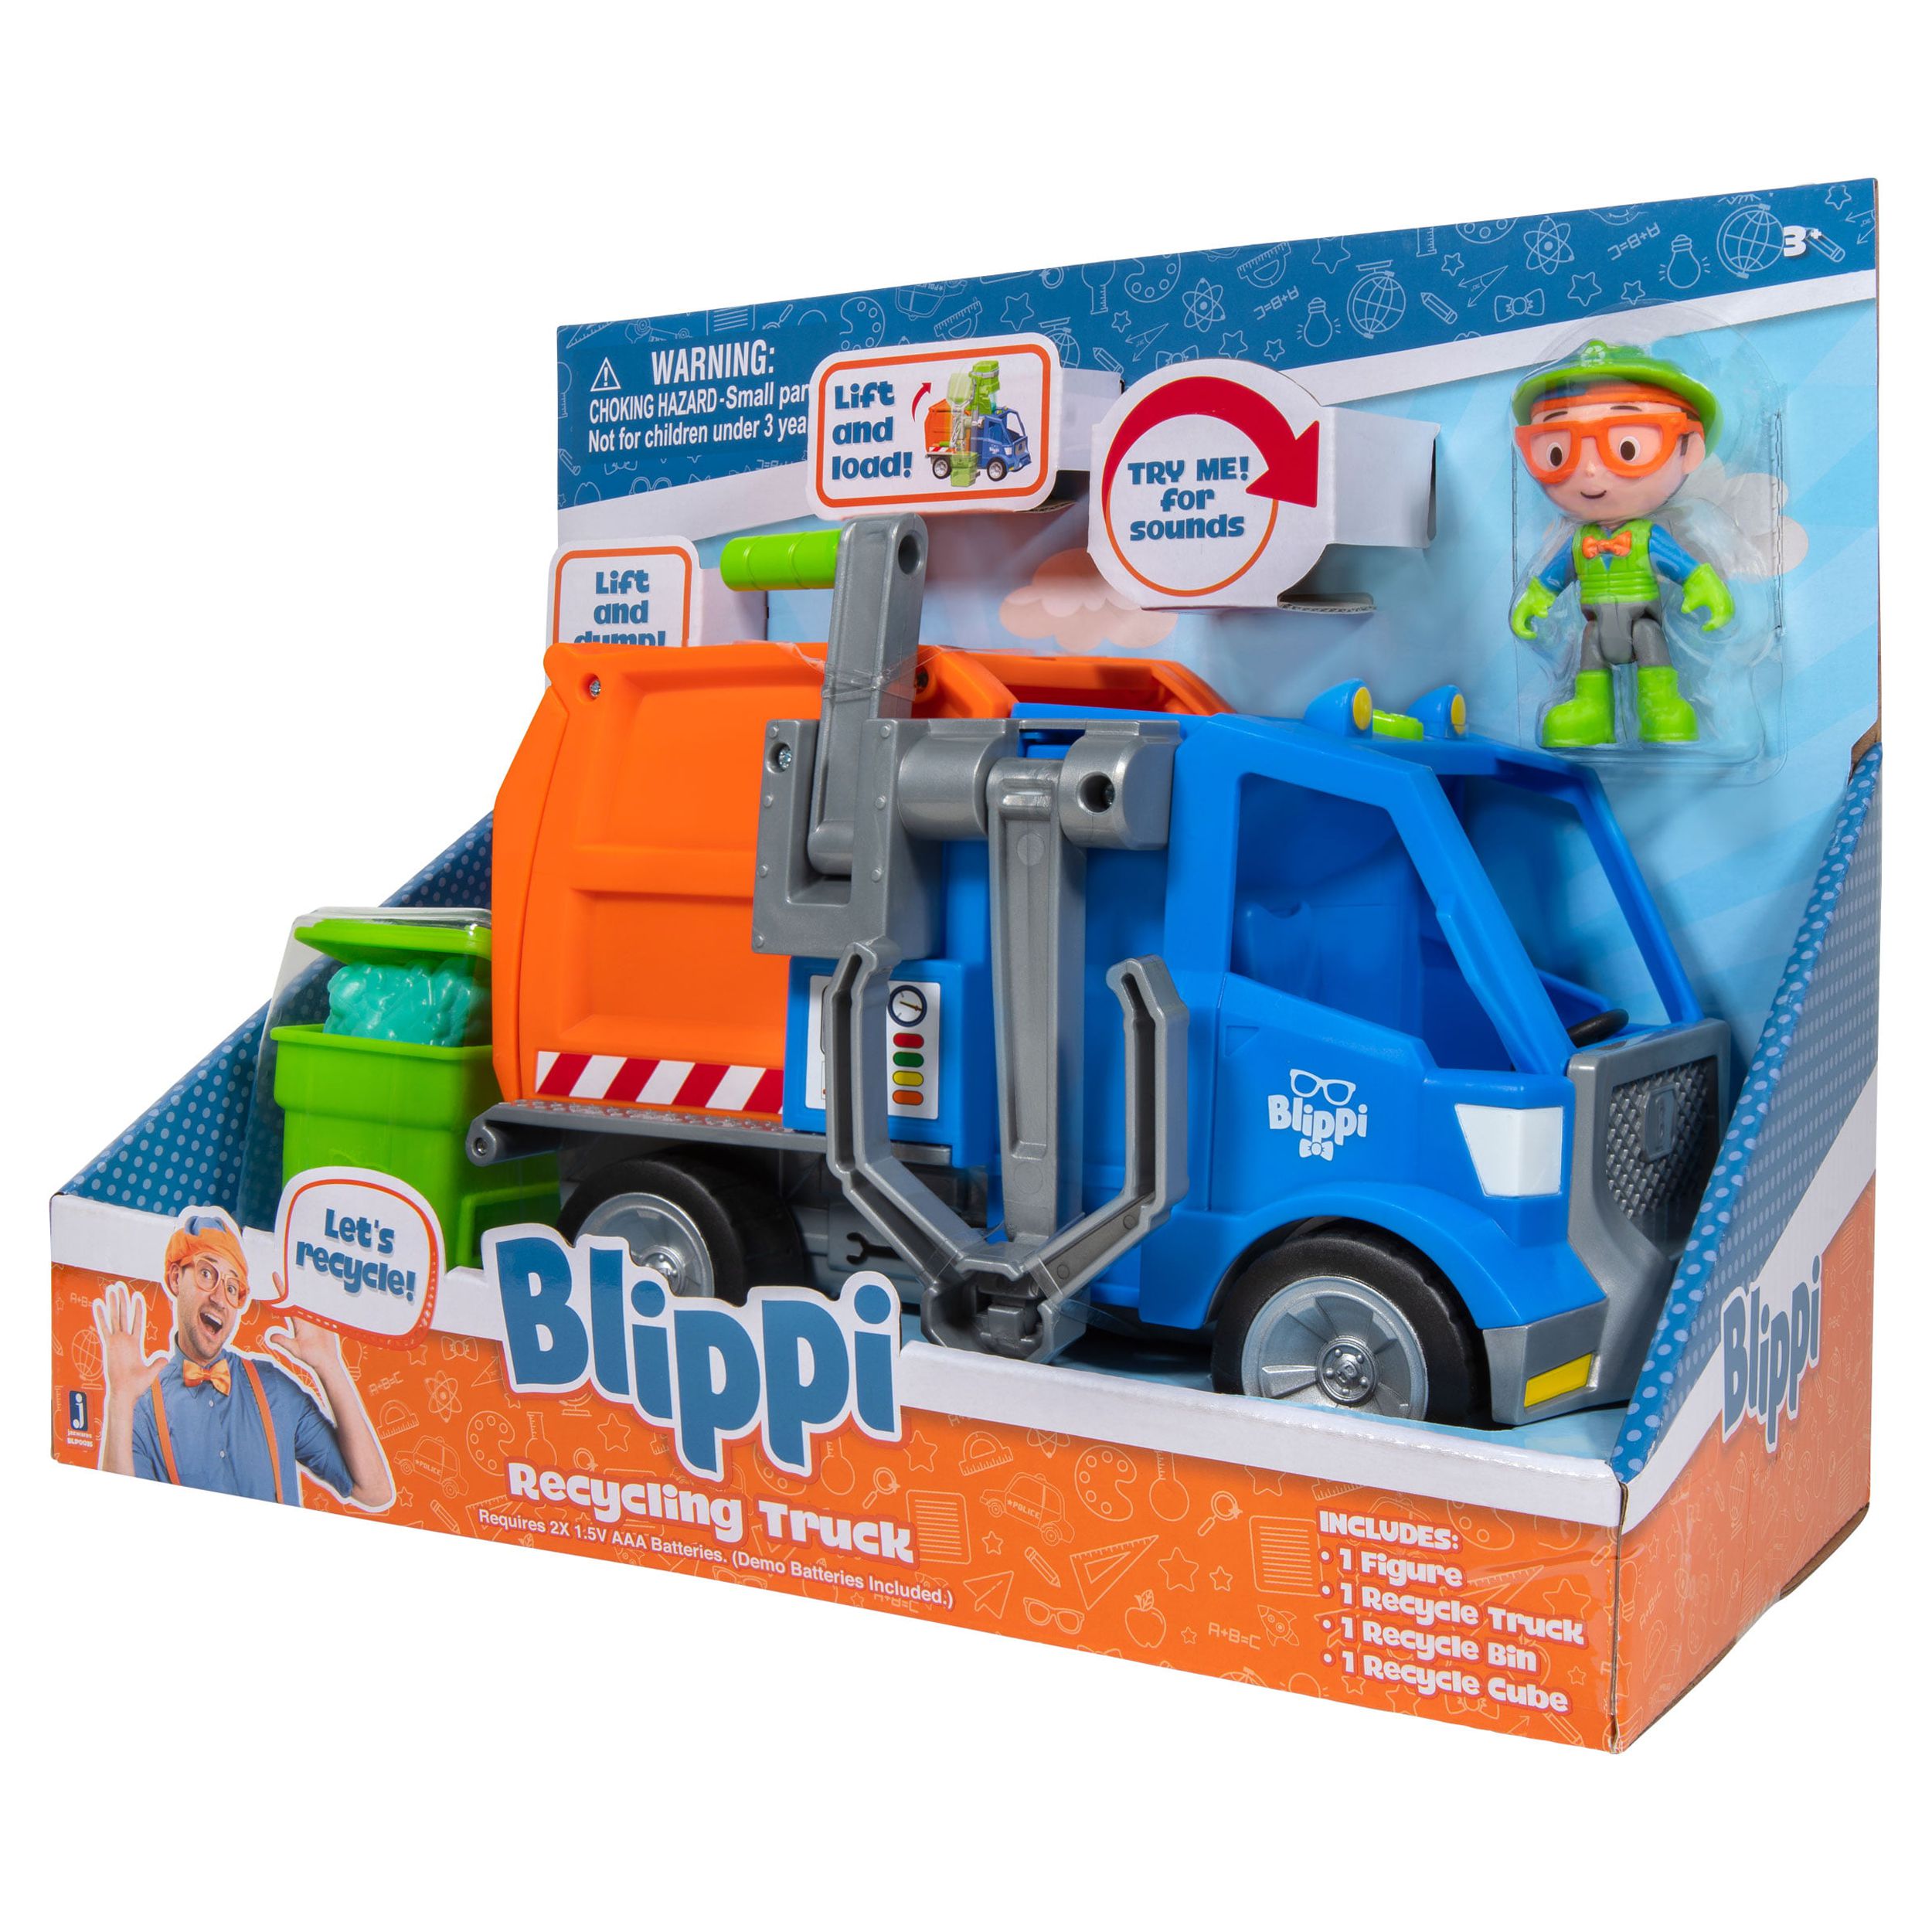 BLIPPI Recycling Truck Play Vehicle - image 18 of 18